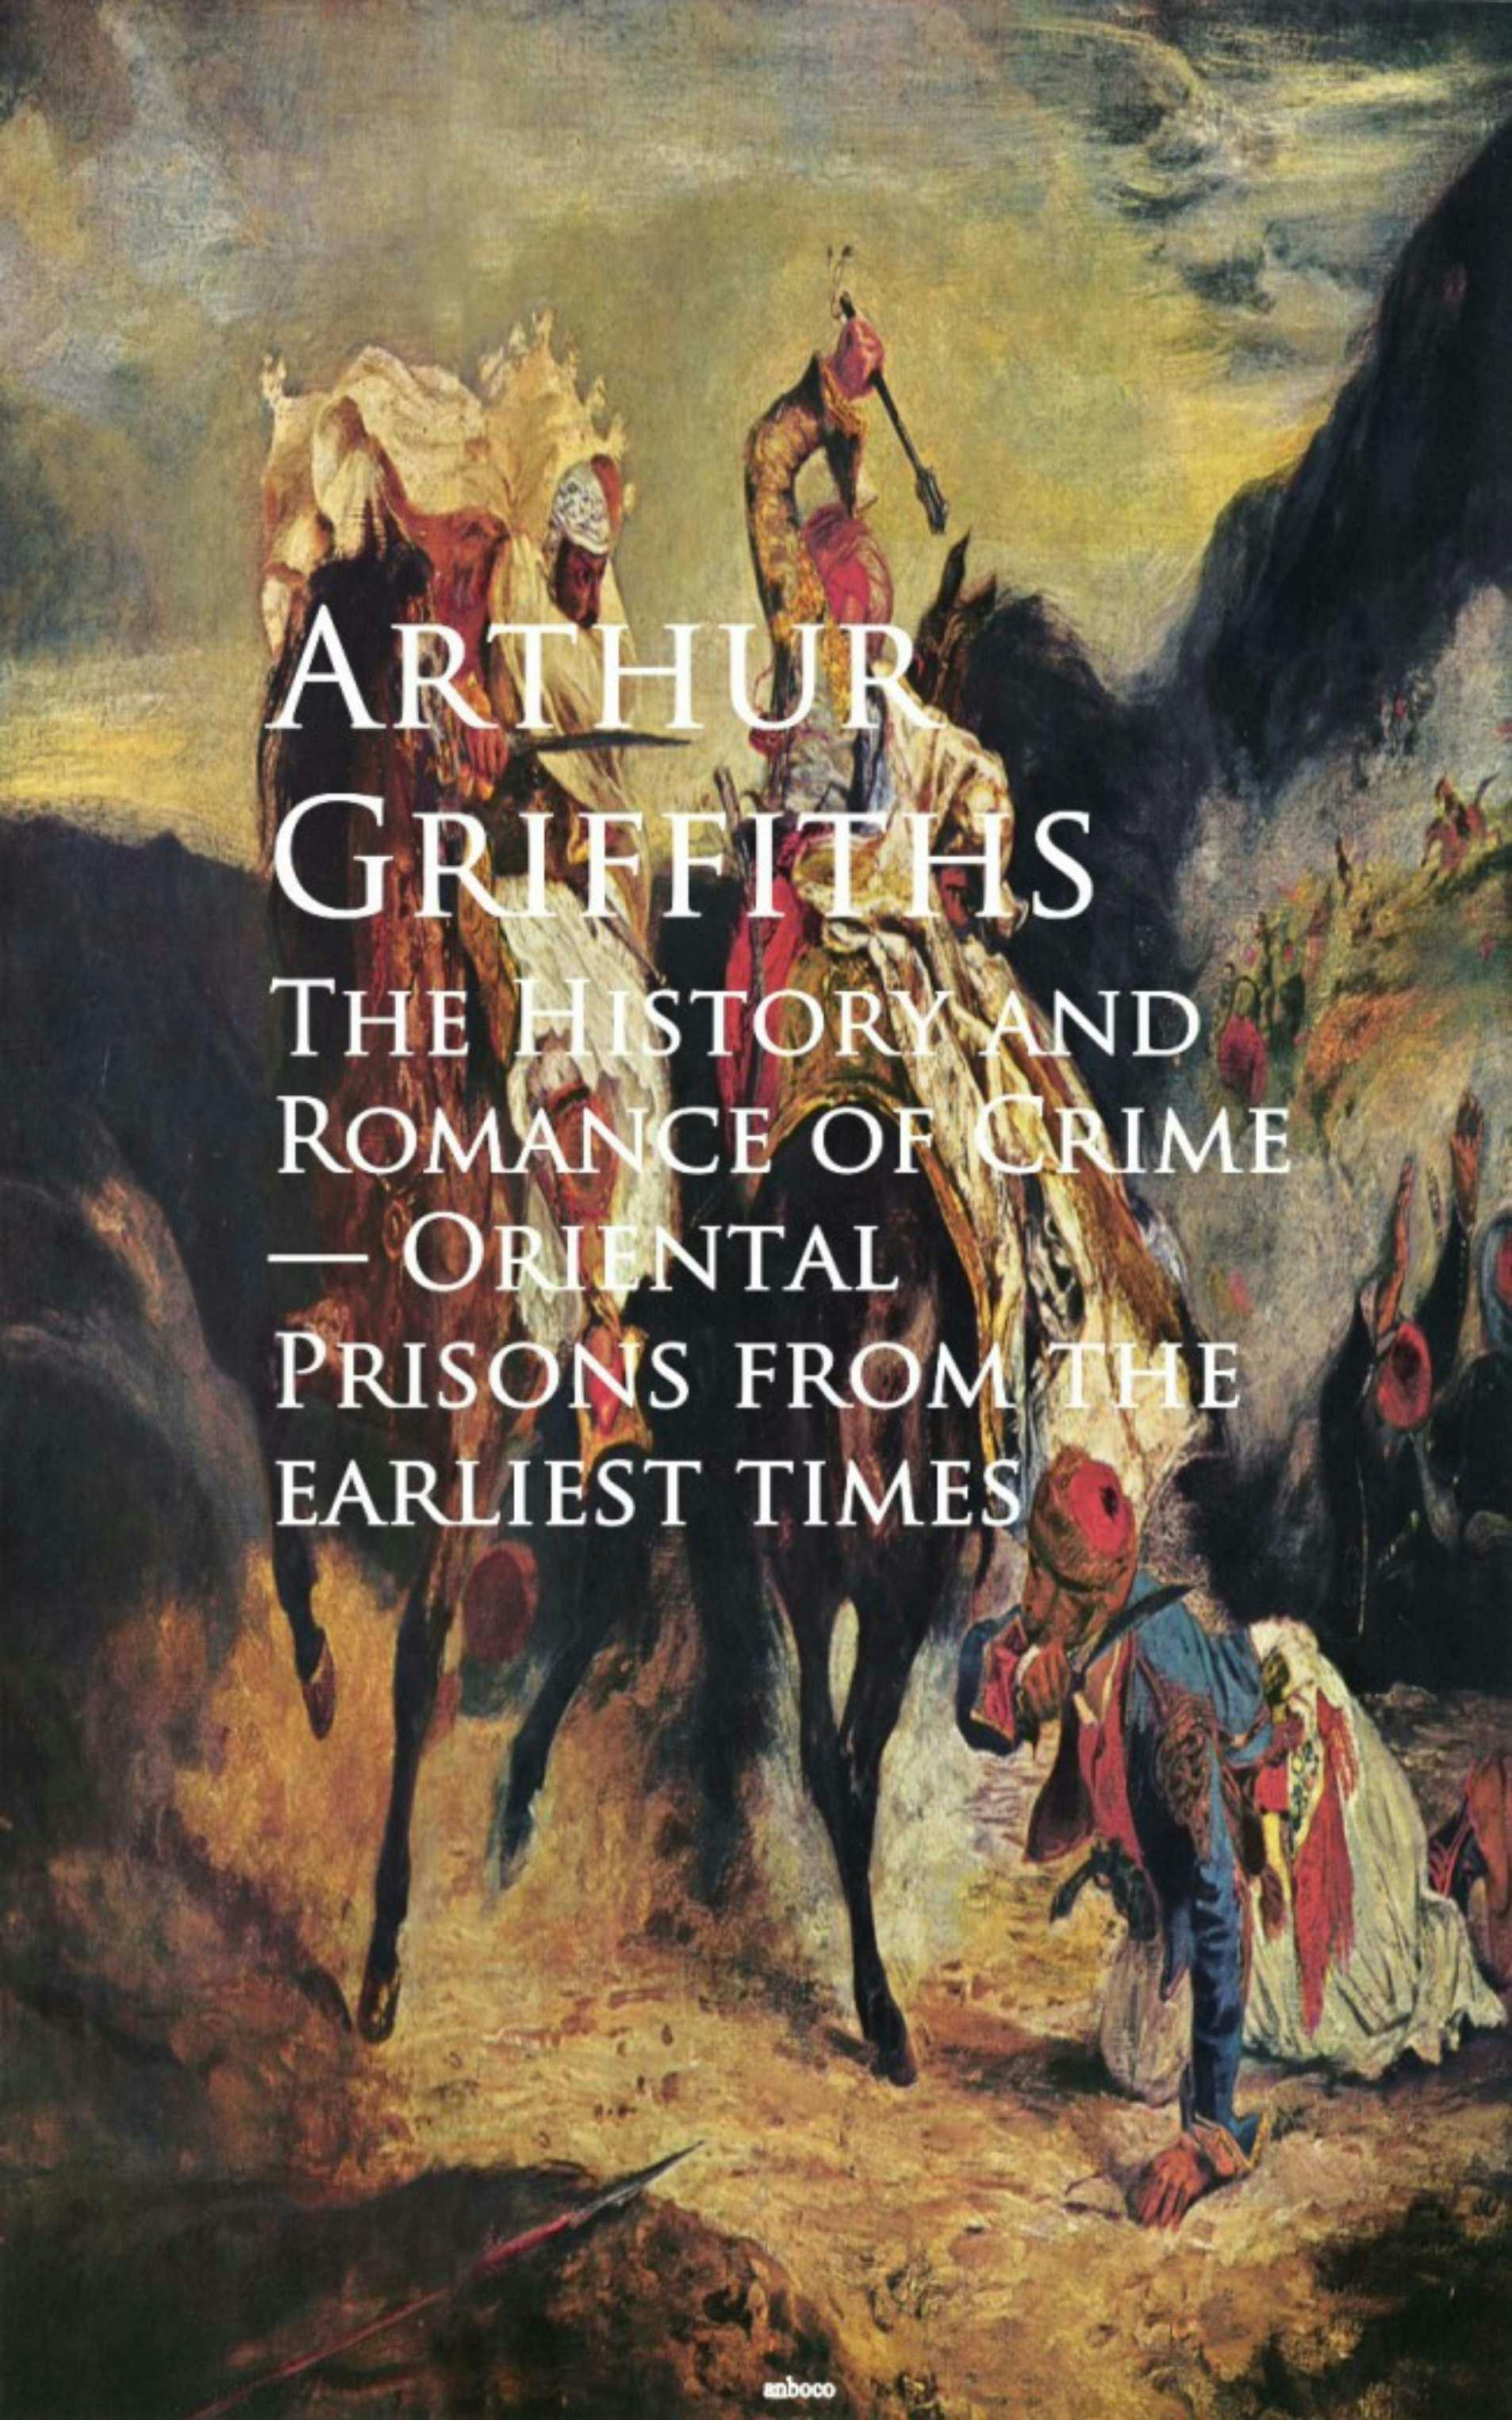 The History and Romance of Crime: Oriental Prisons from the Earliest Times - Arthur Griffiths